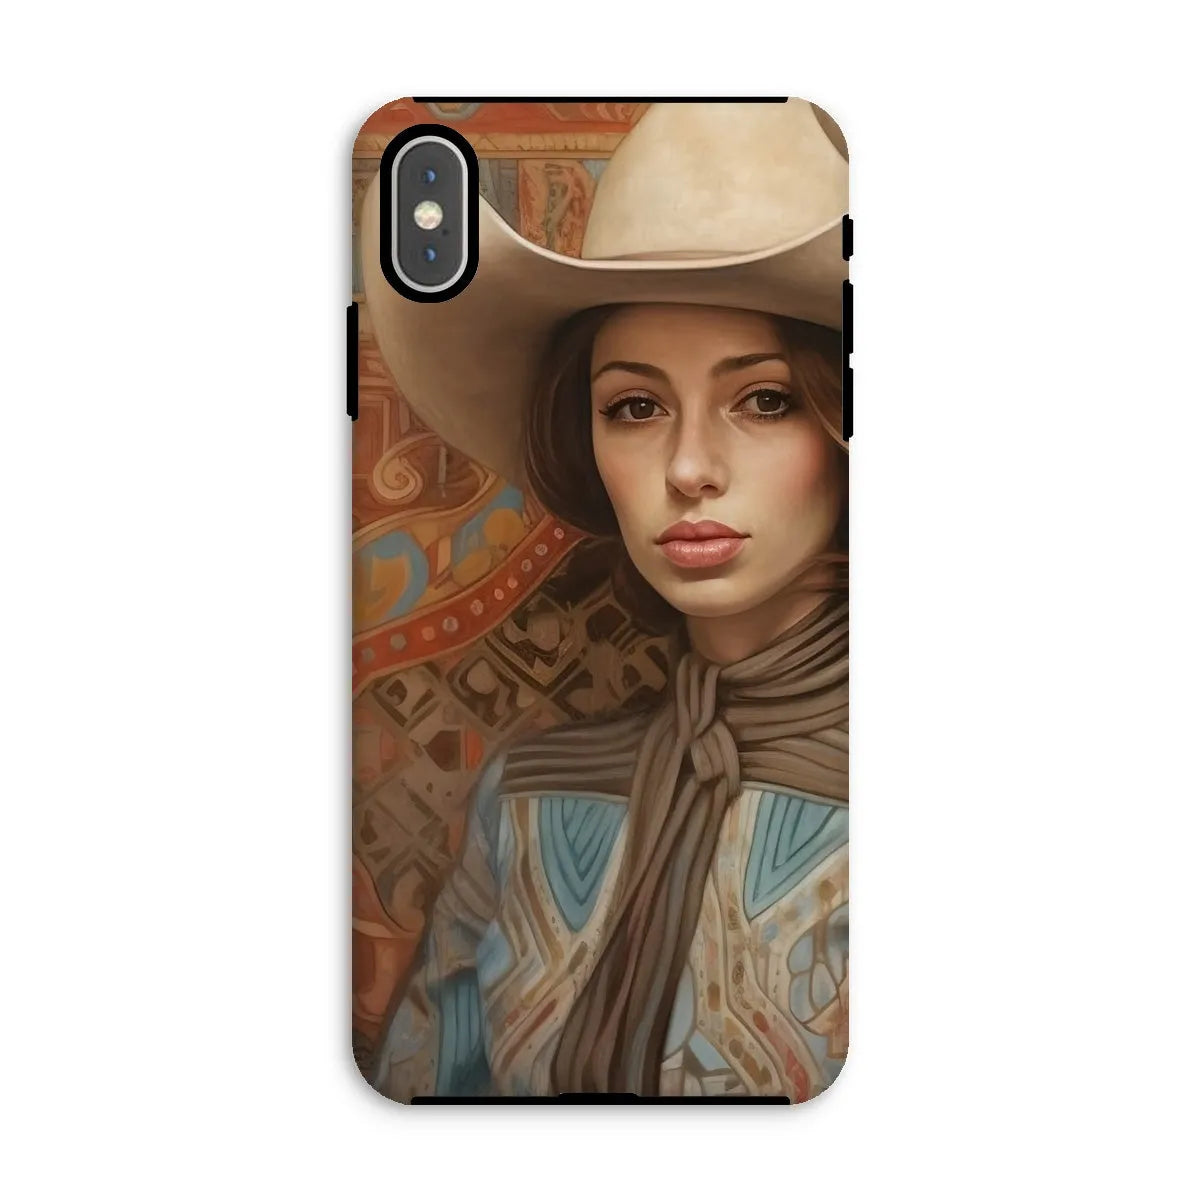 Anahita The Lesbian Cowgirl - Sapphic Art Phone Case - Iphone Xs Max / Matte - Mobile Phone Cases - Aesthetic Art